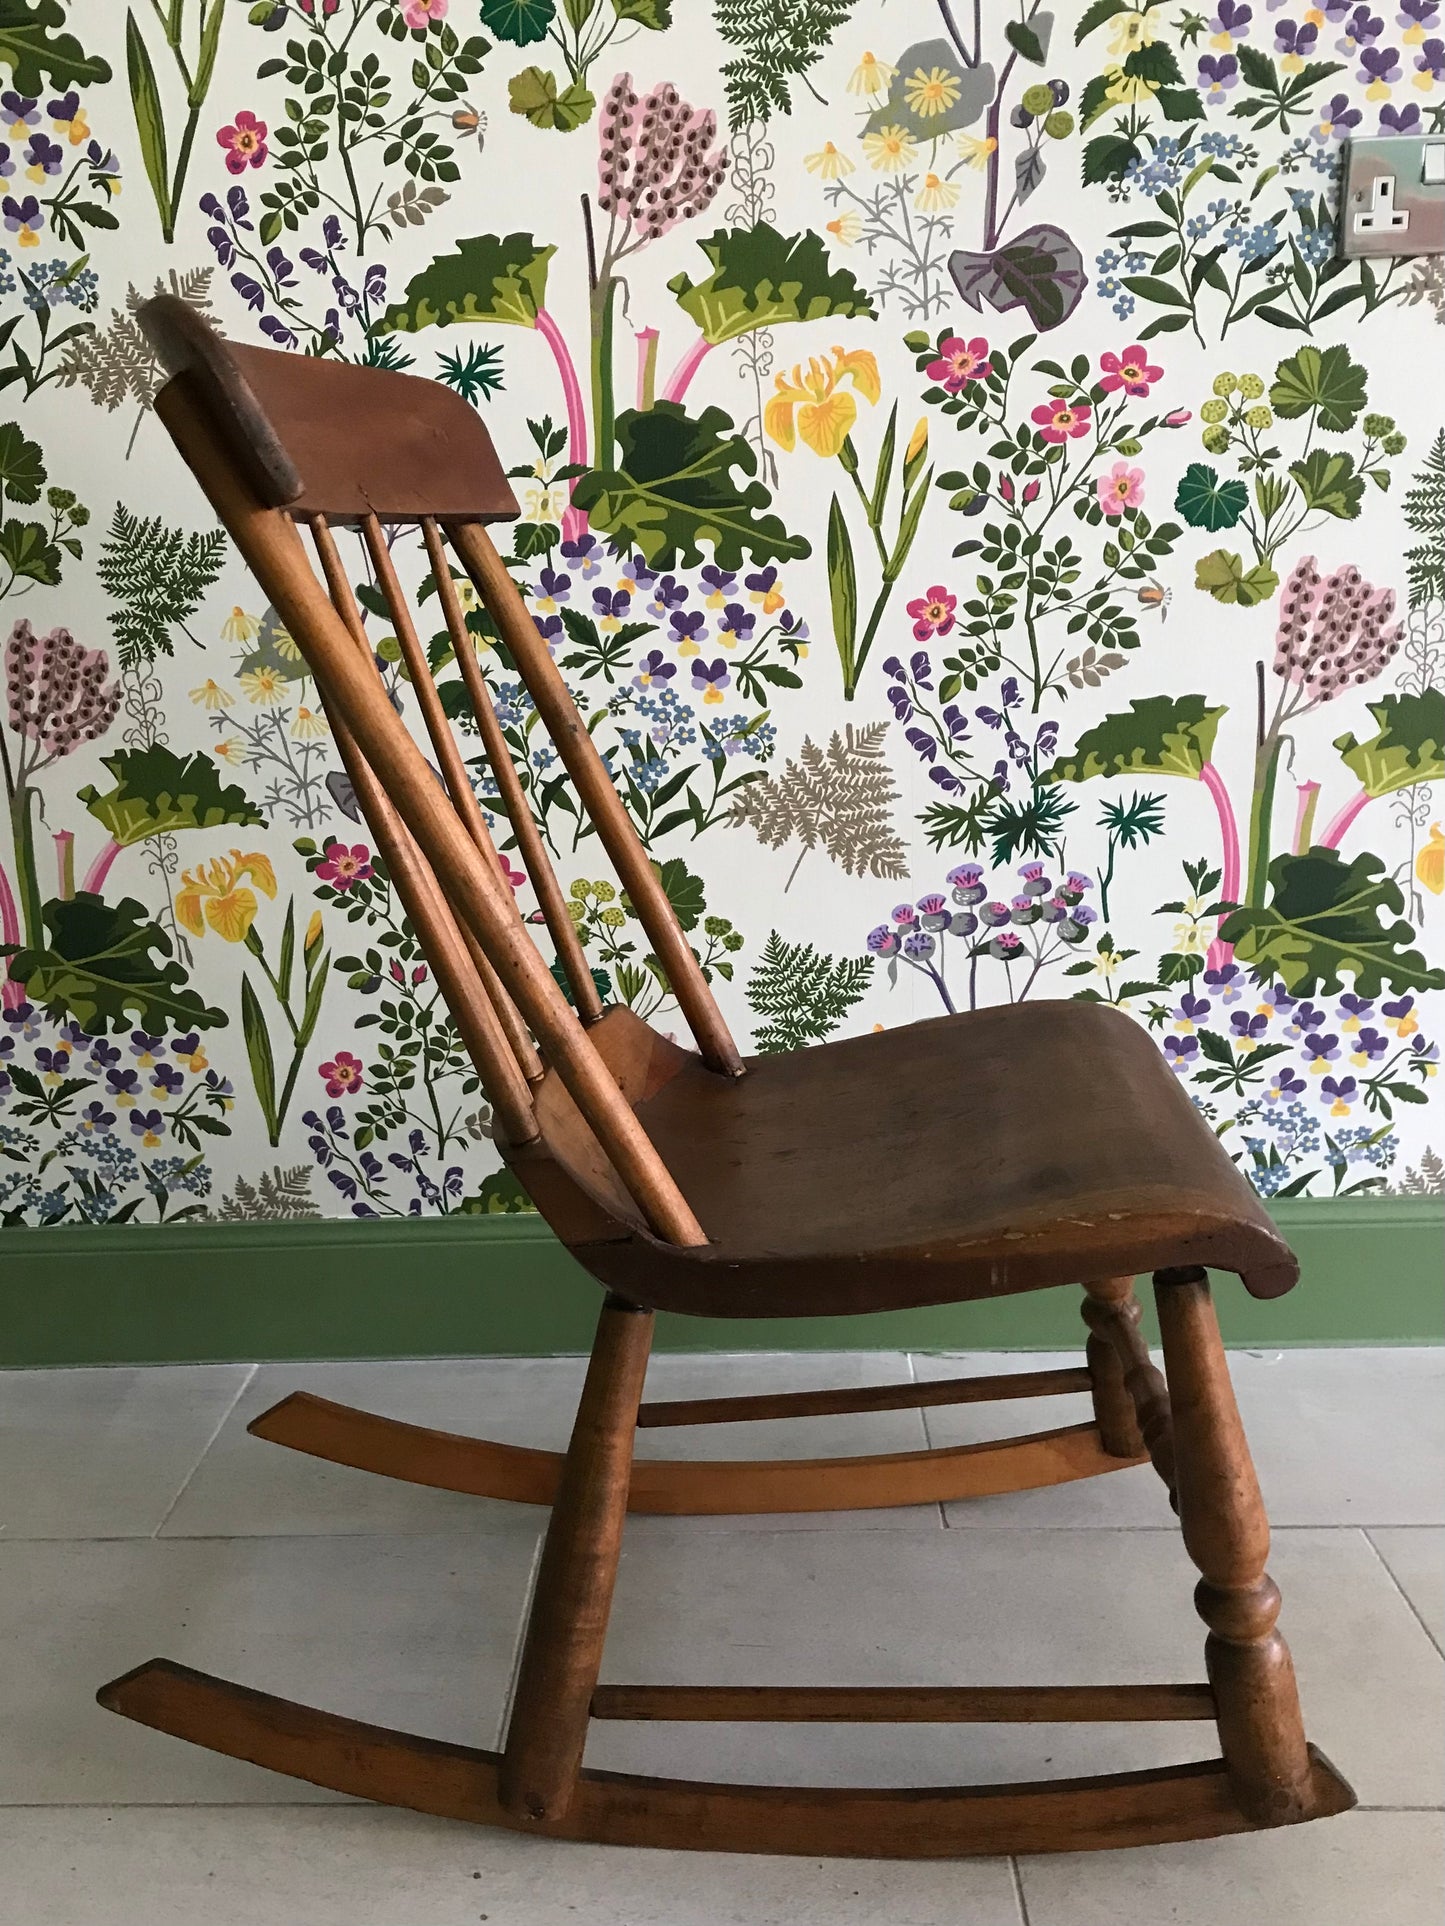 Vintage small wooden rocking chair